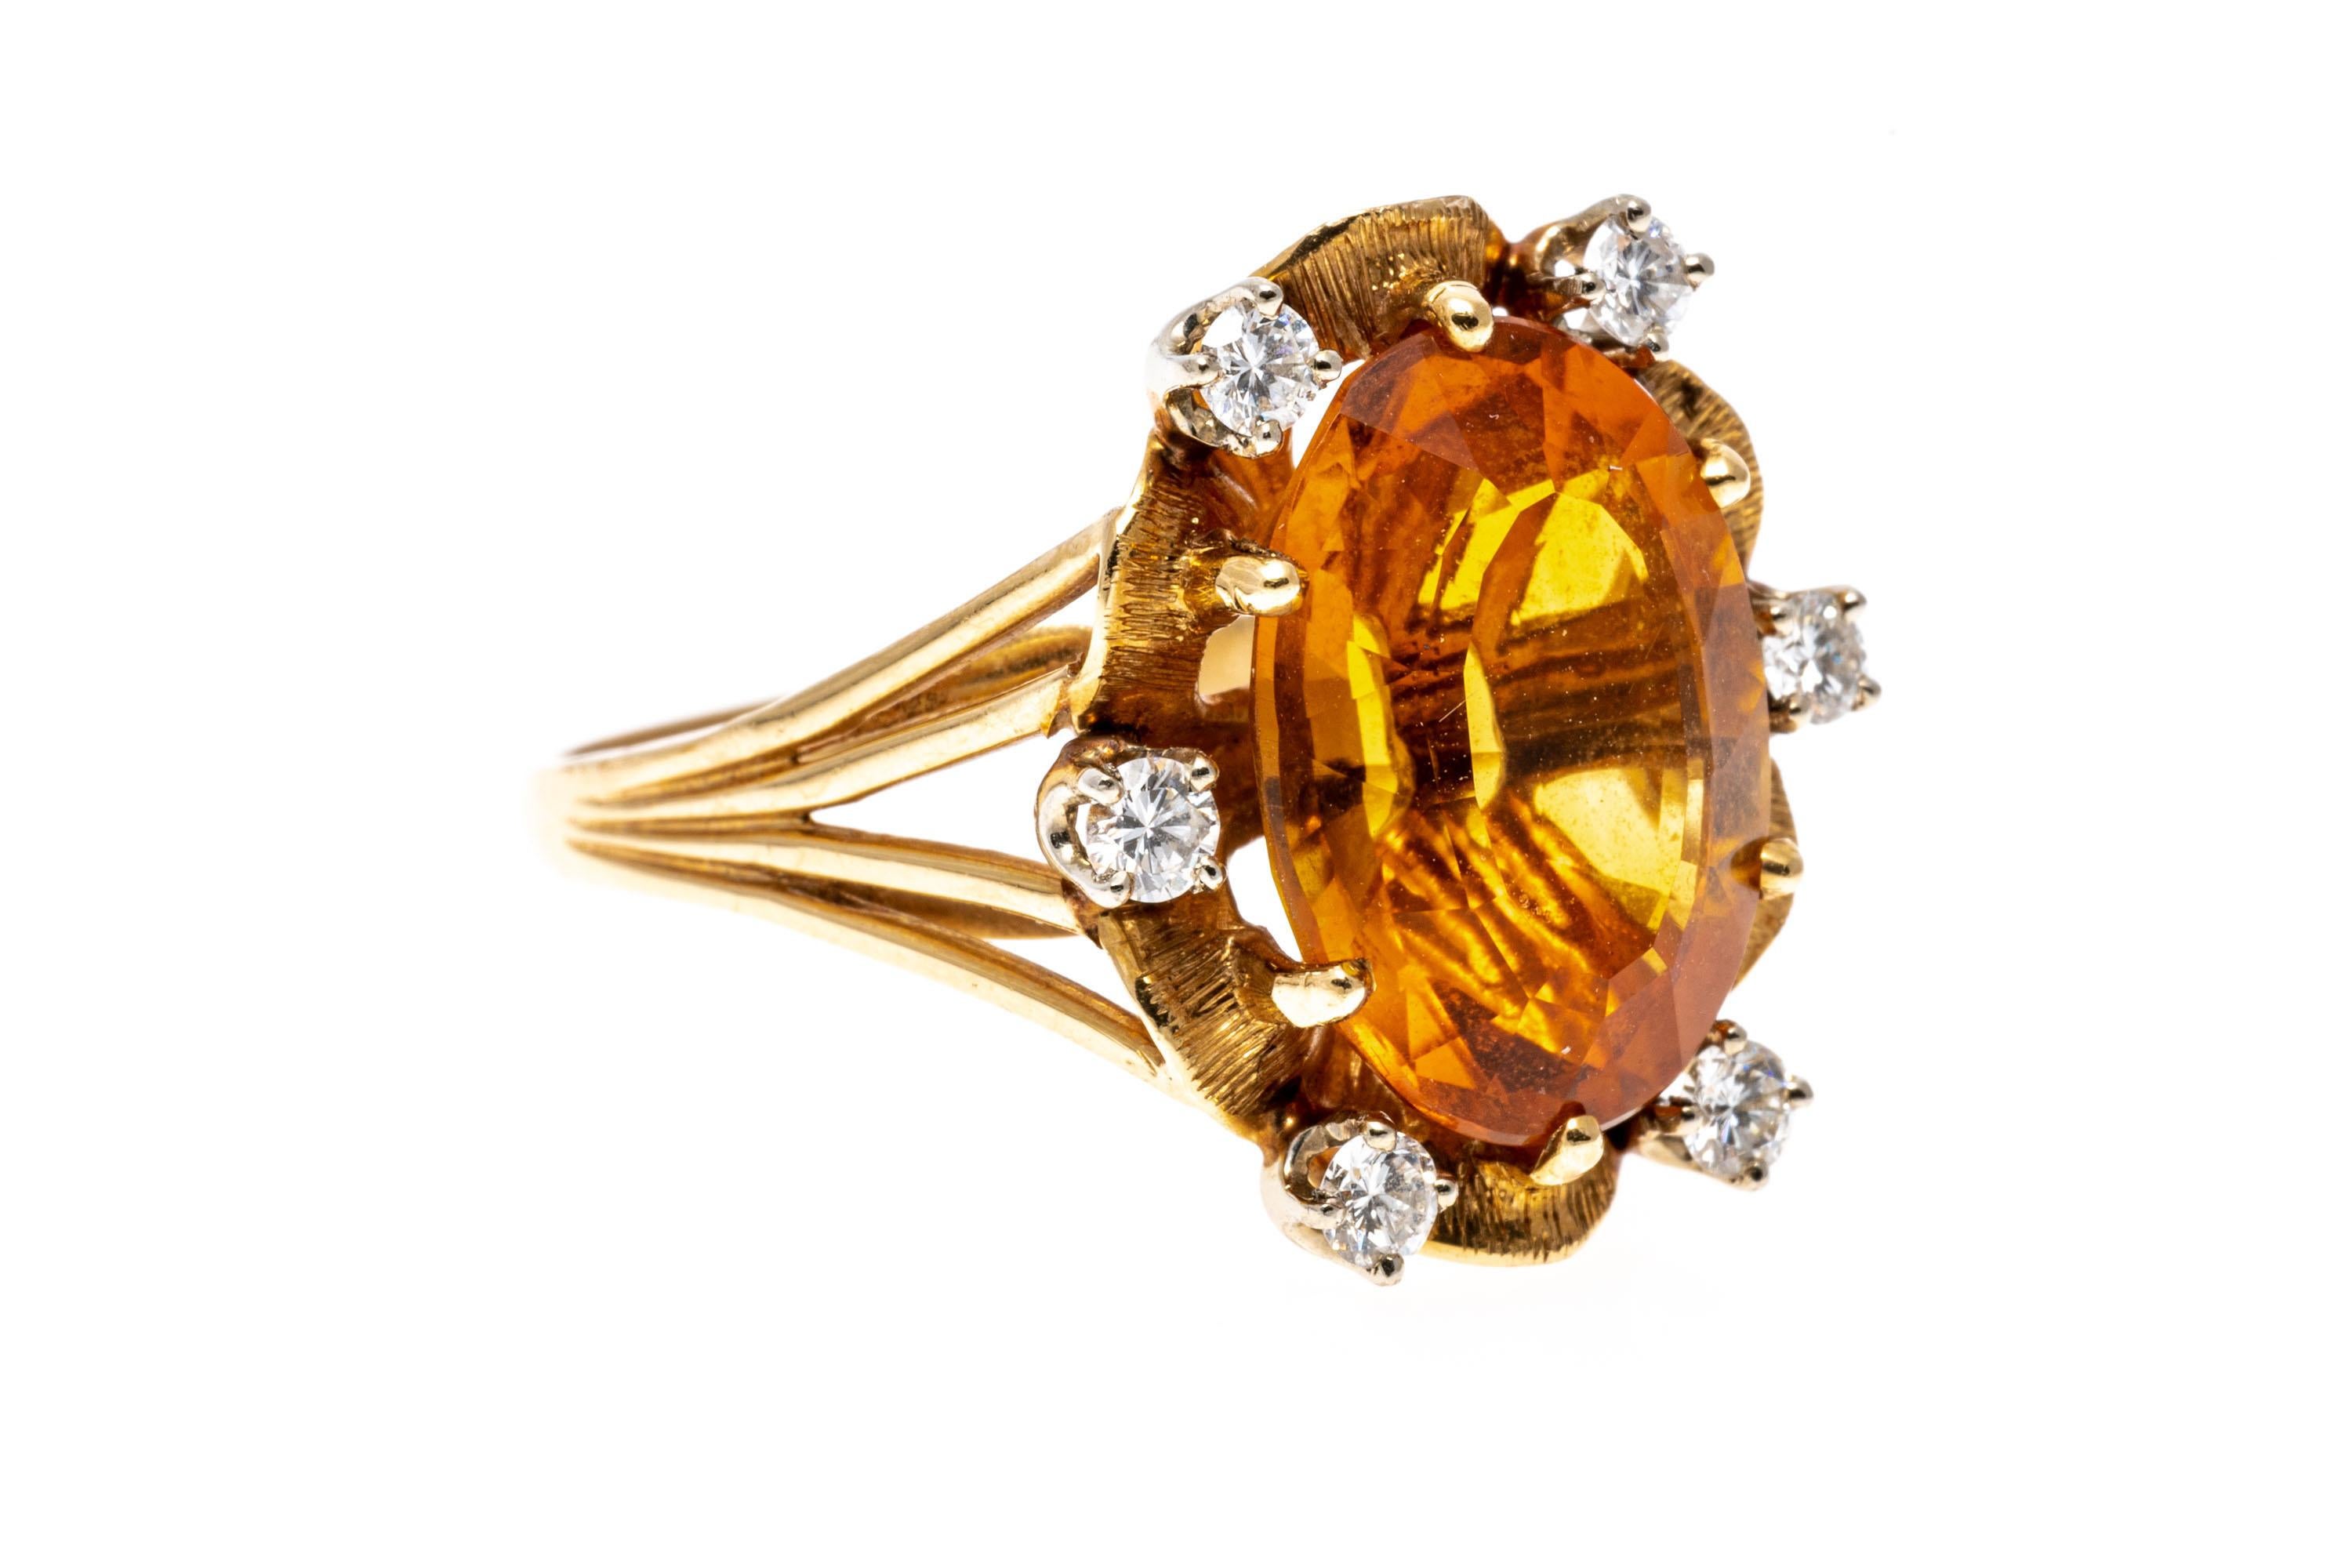 14k yellow gold ring. This gorgeous ring features a center oval faceted, medium to dark orange color citrine, approximately 5.10 CTS, accented with a florentine finished scalloped border, decorated with round brilliant cut diamonds, approximately